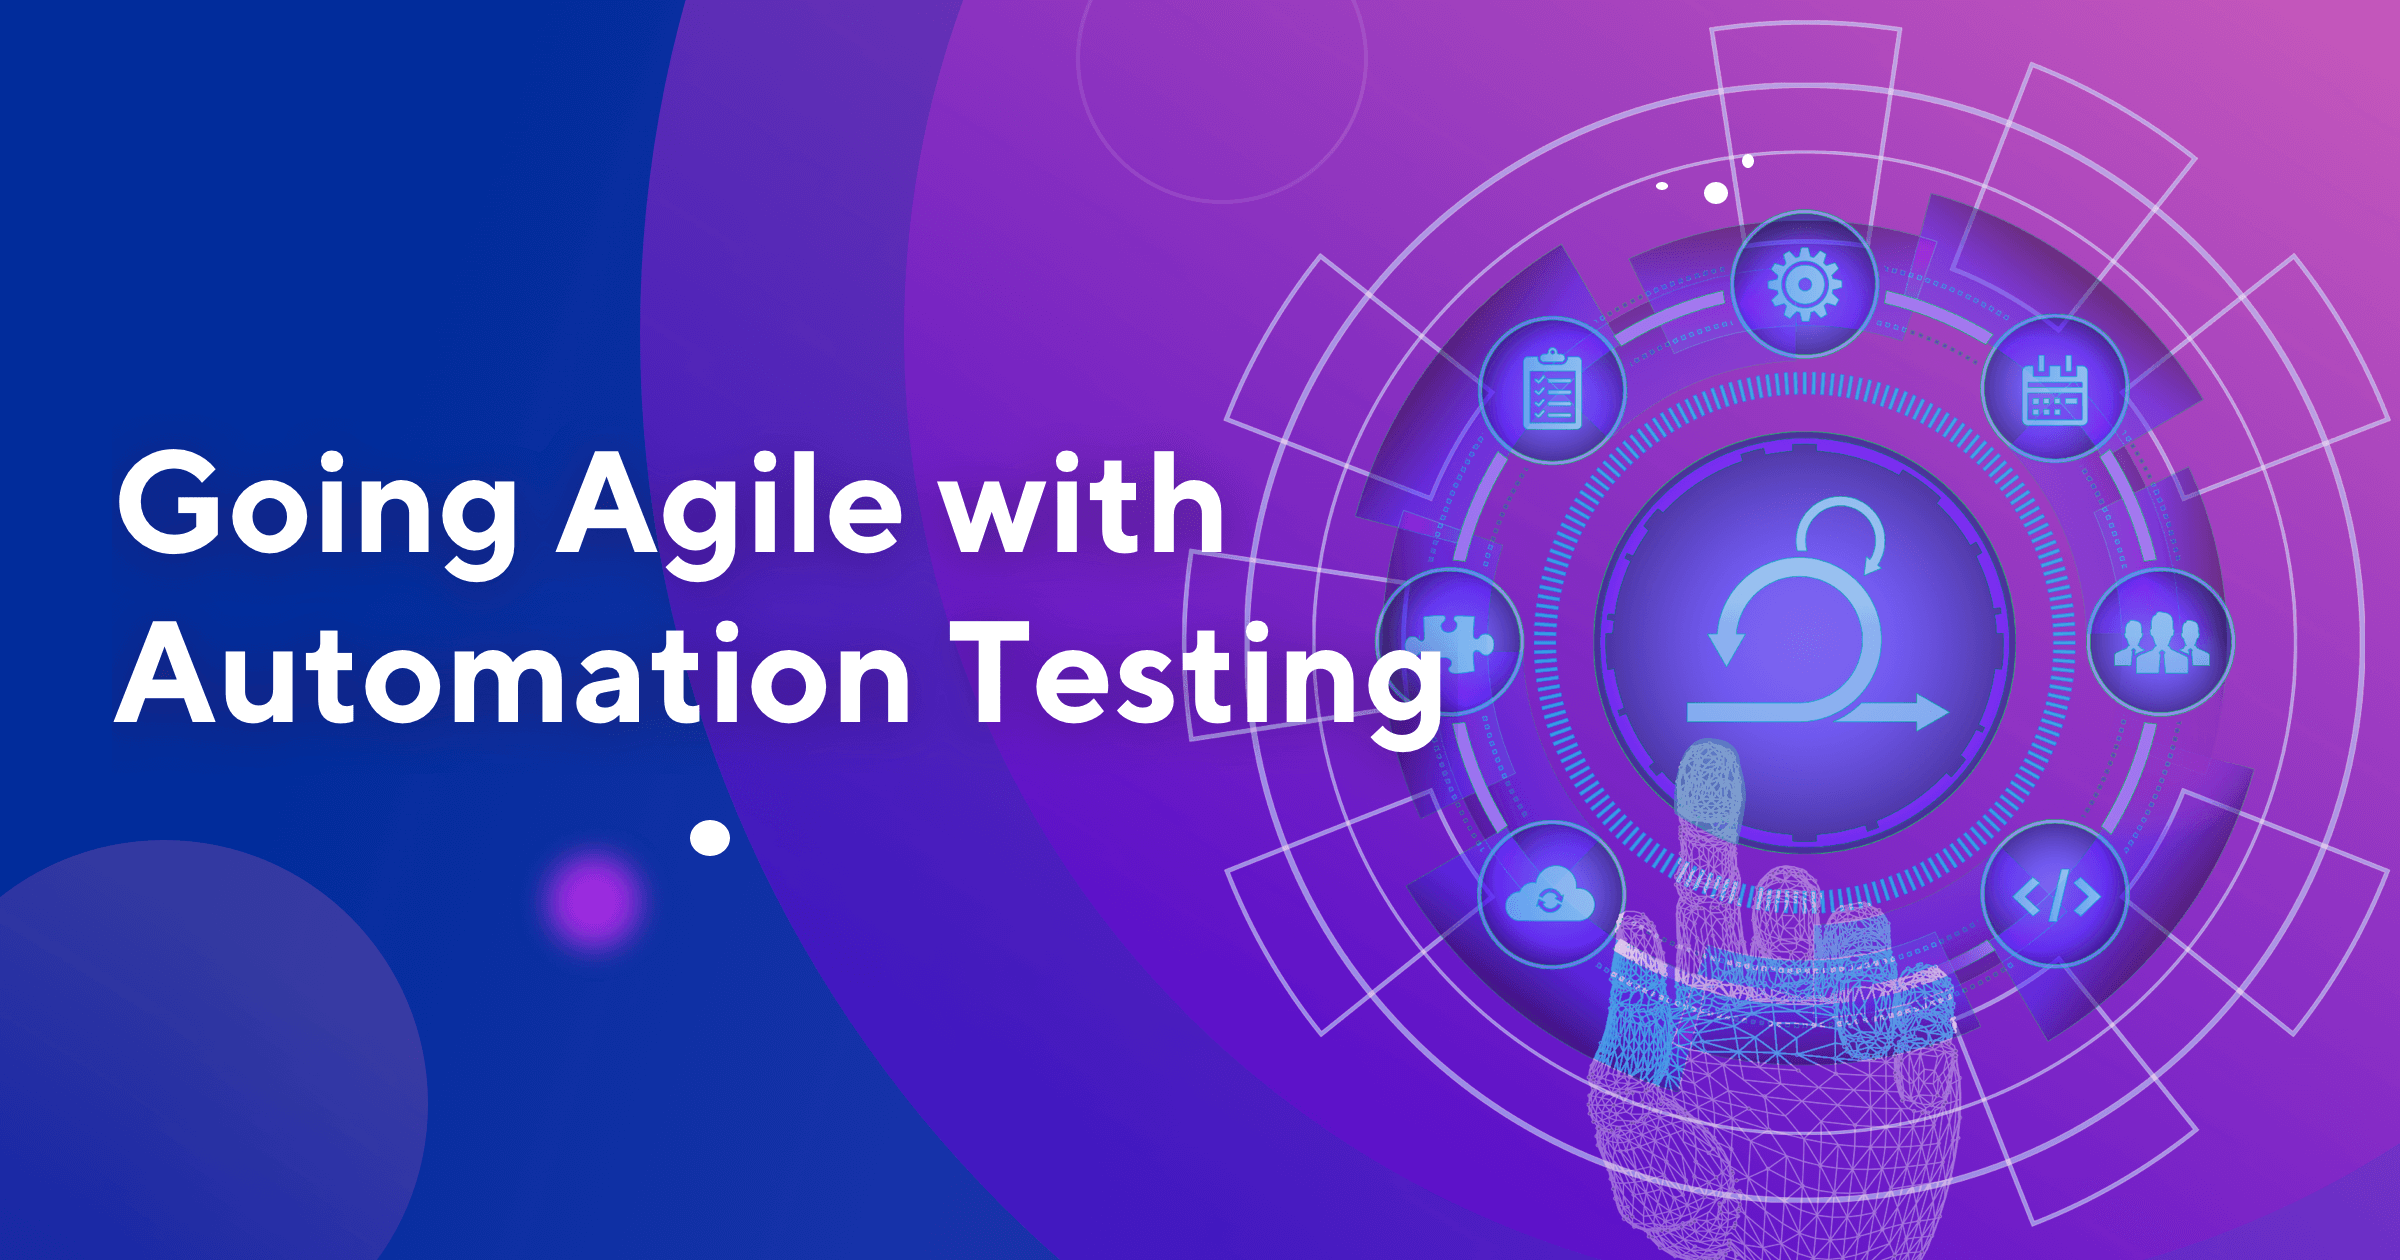 How to Implement Automation Testing in Agile teams | A Complete Guide